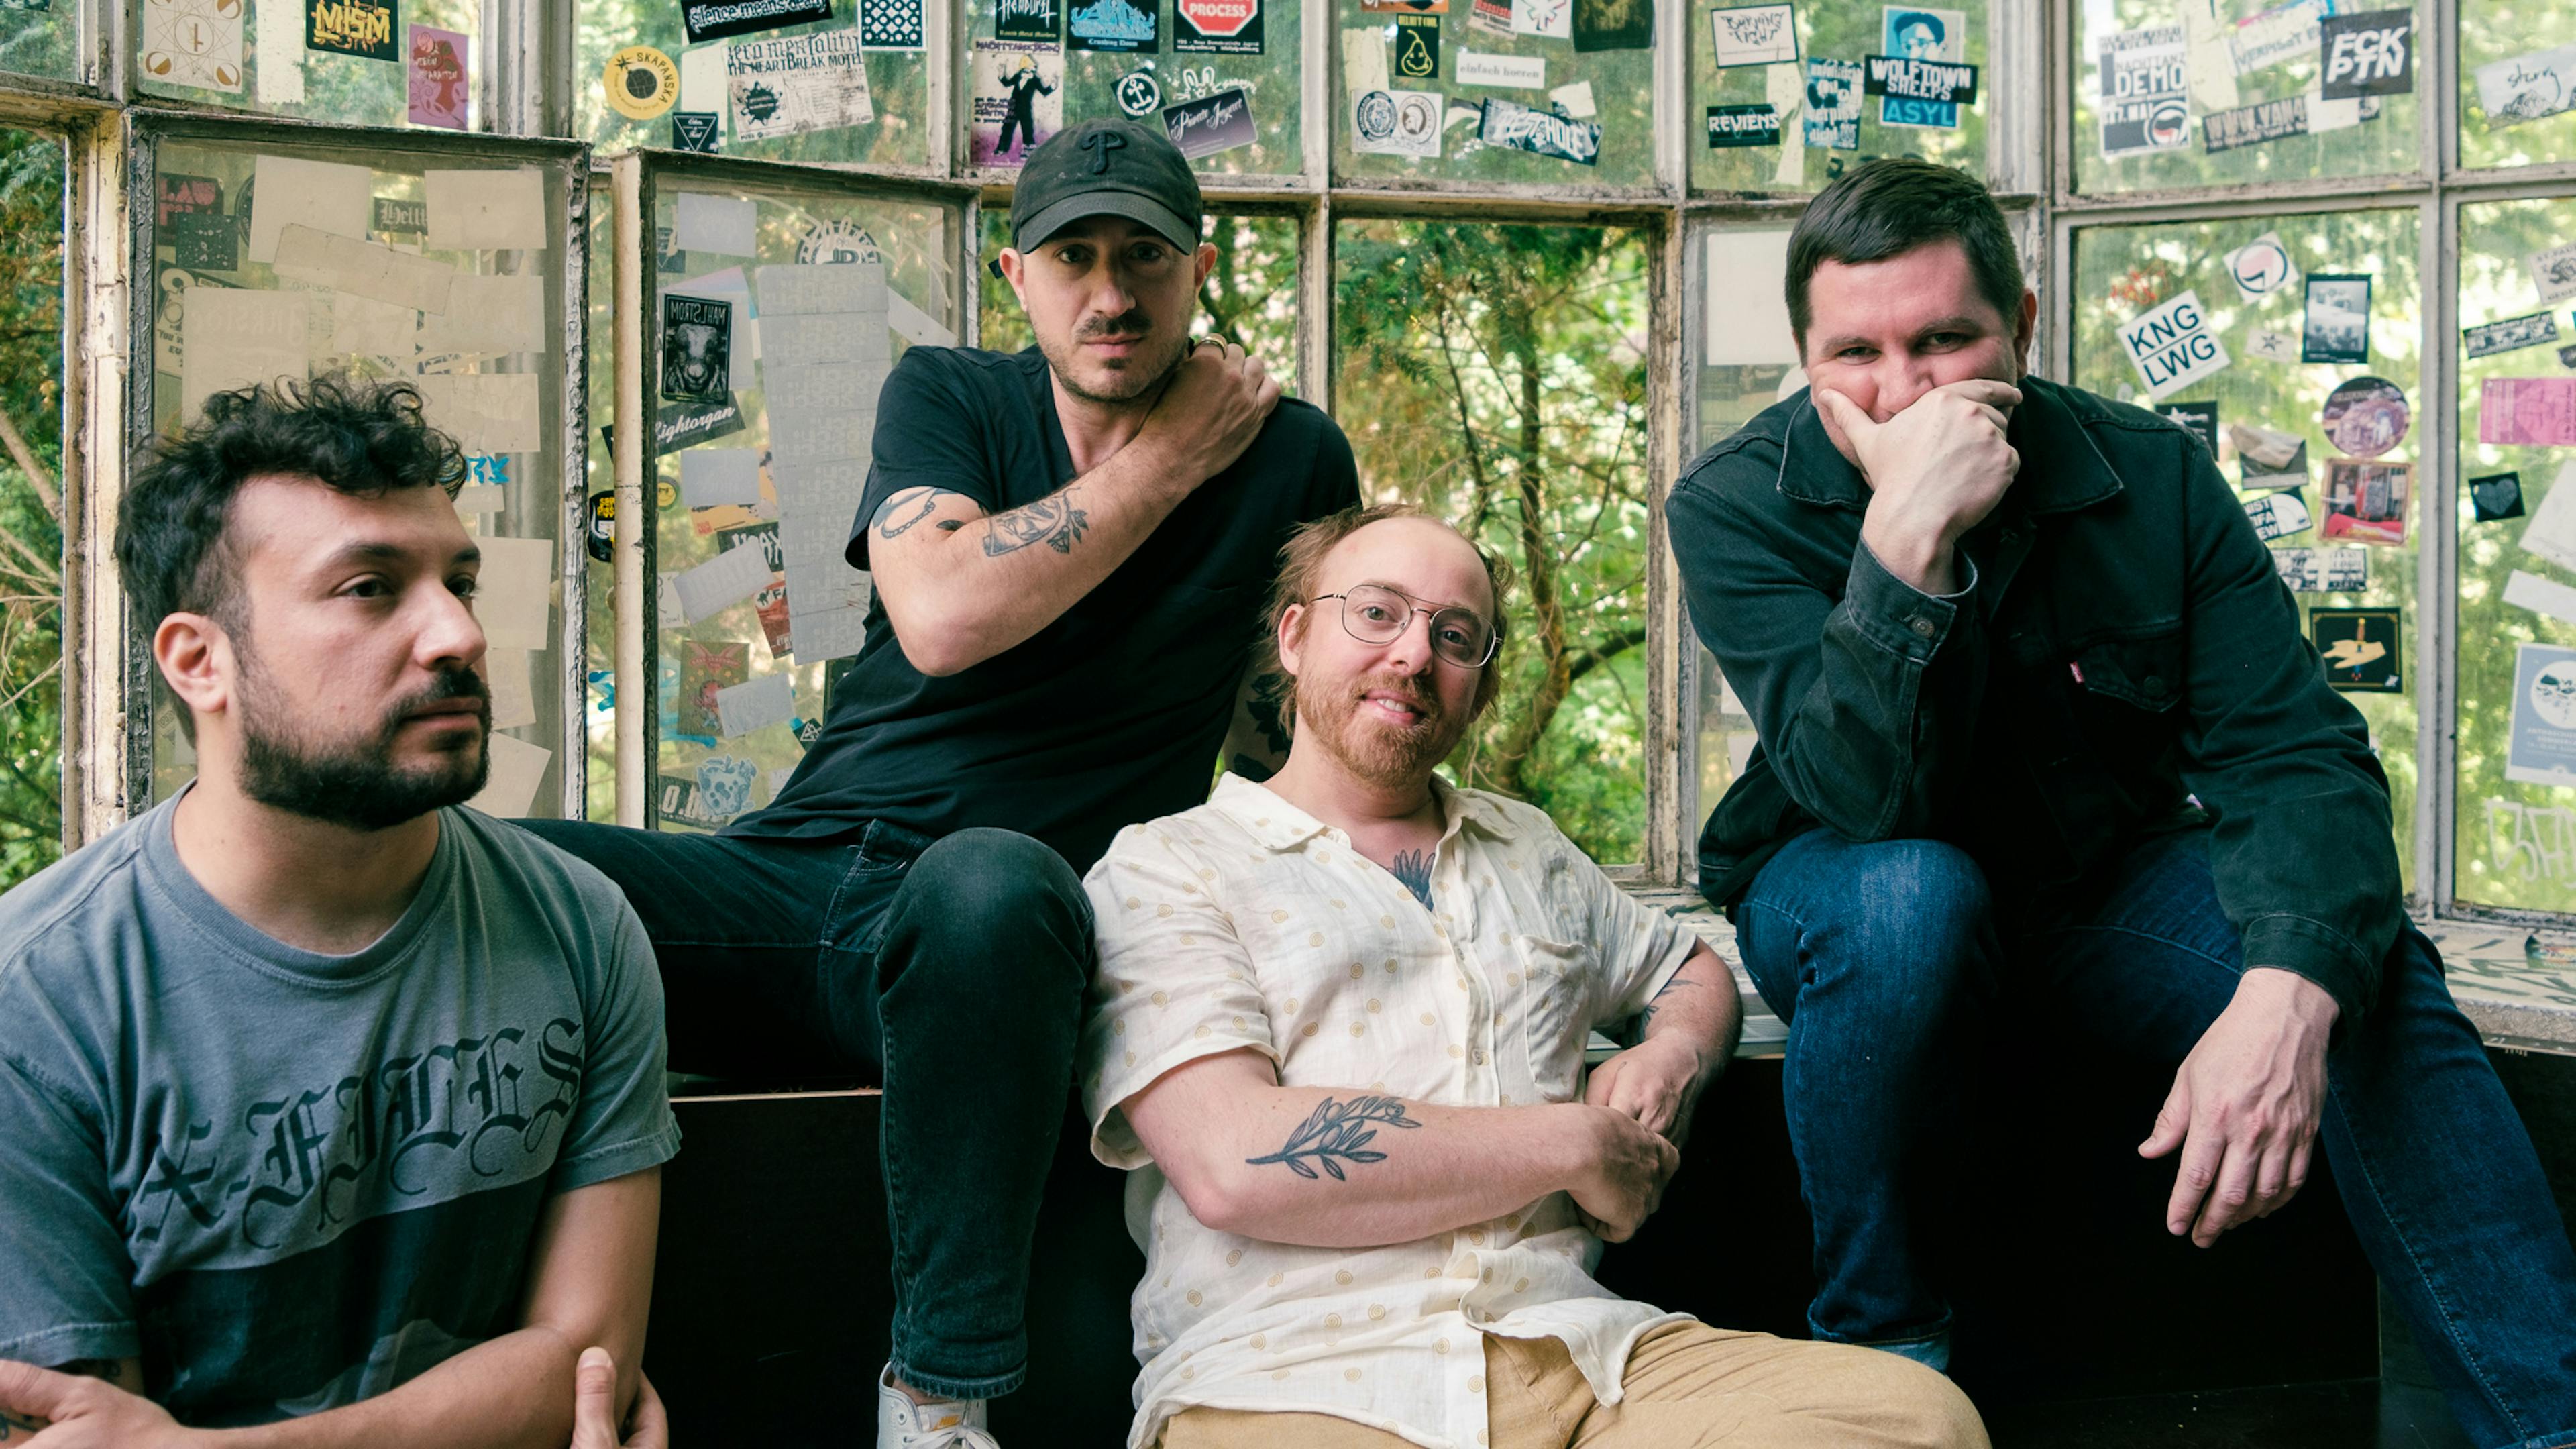 The Menzingers: “I don’t know many bands who are all best friends. It’s crazy how close we are after all these years”